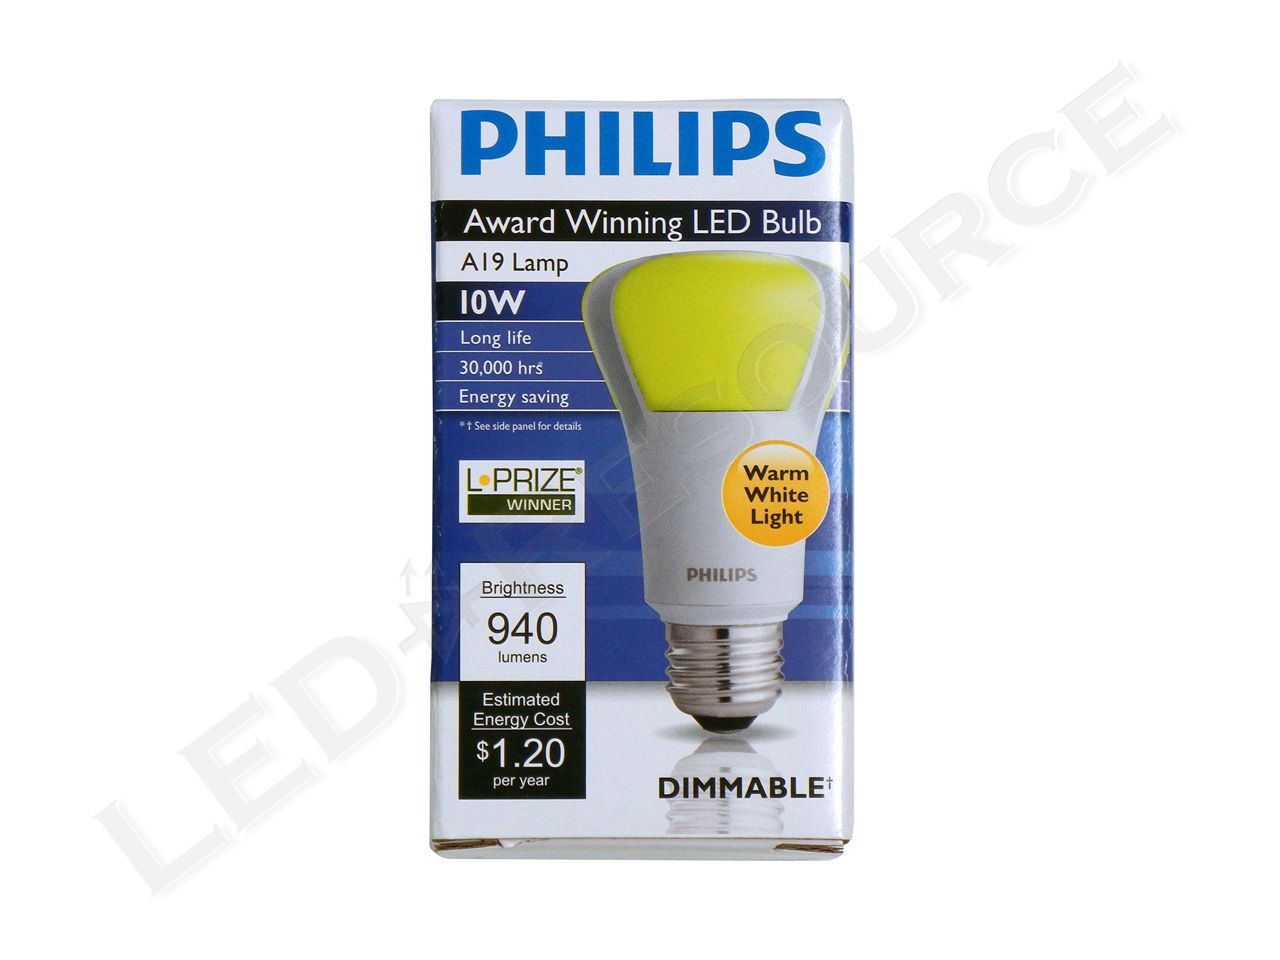 Philips L-Prize Award Winning Bulb Review - LED-Resource